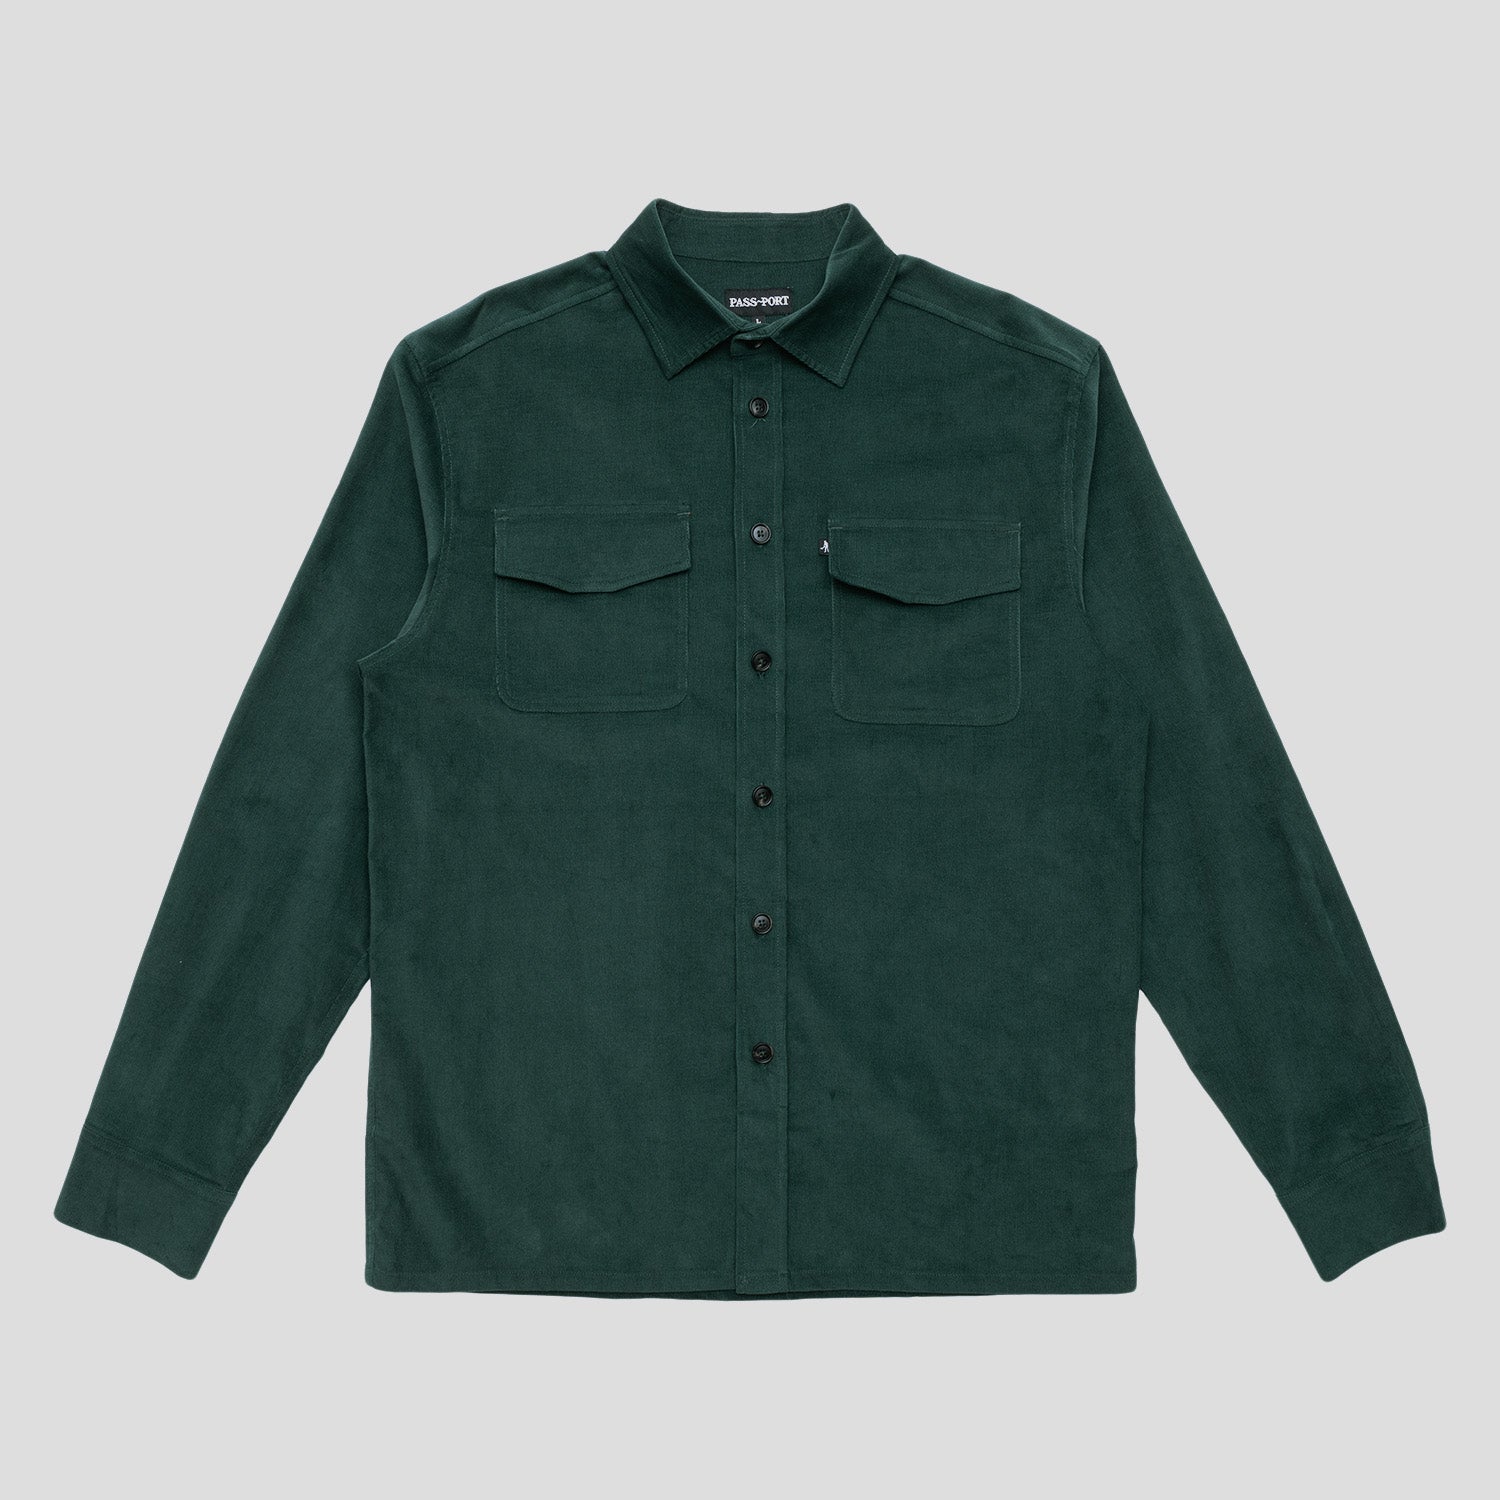 Pass~Port Micro Cord Workers Shirt - Forest Green